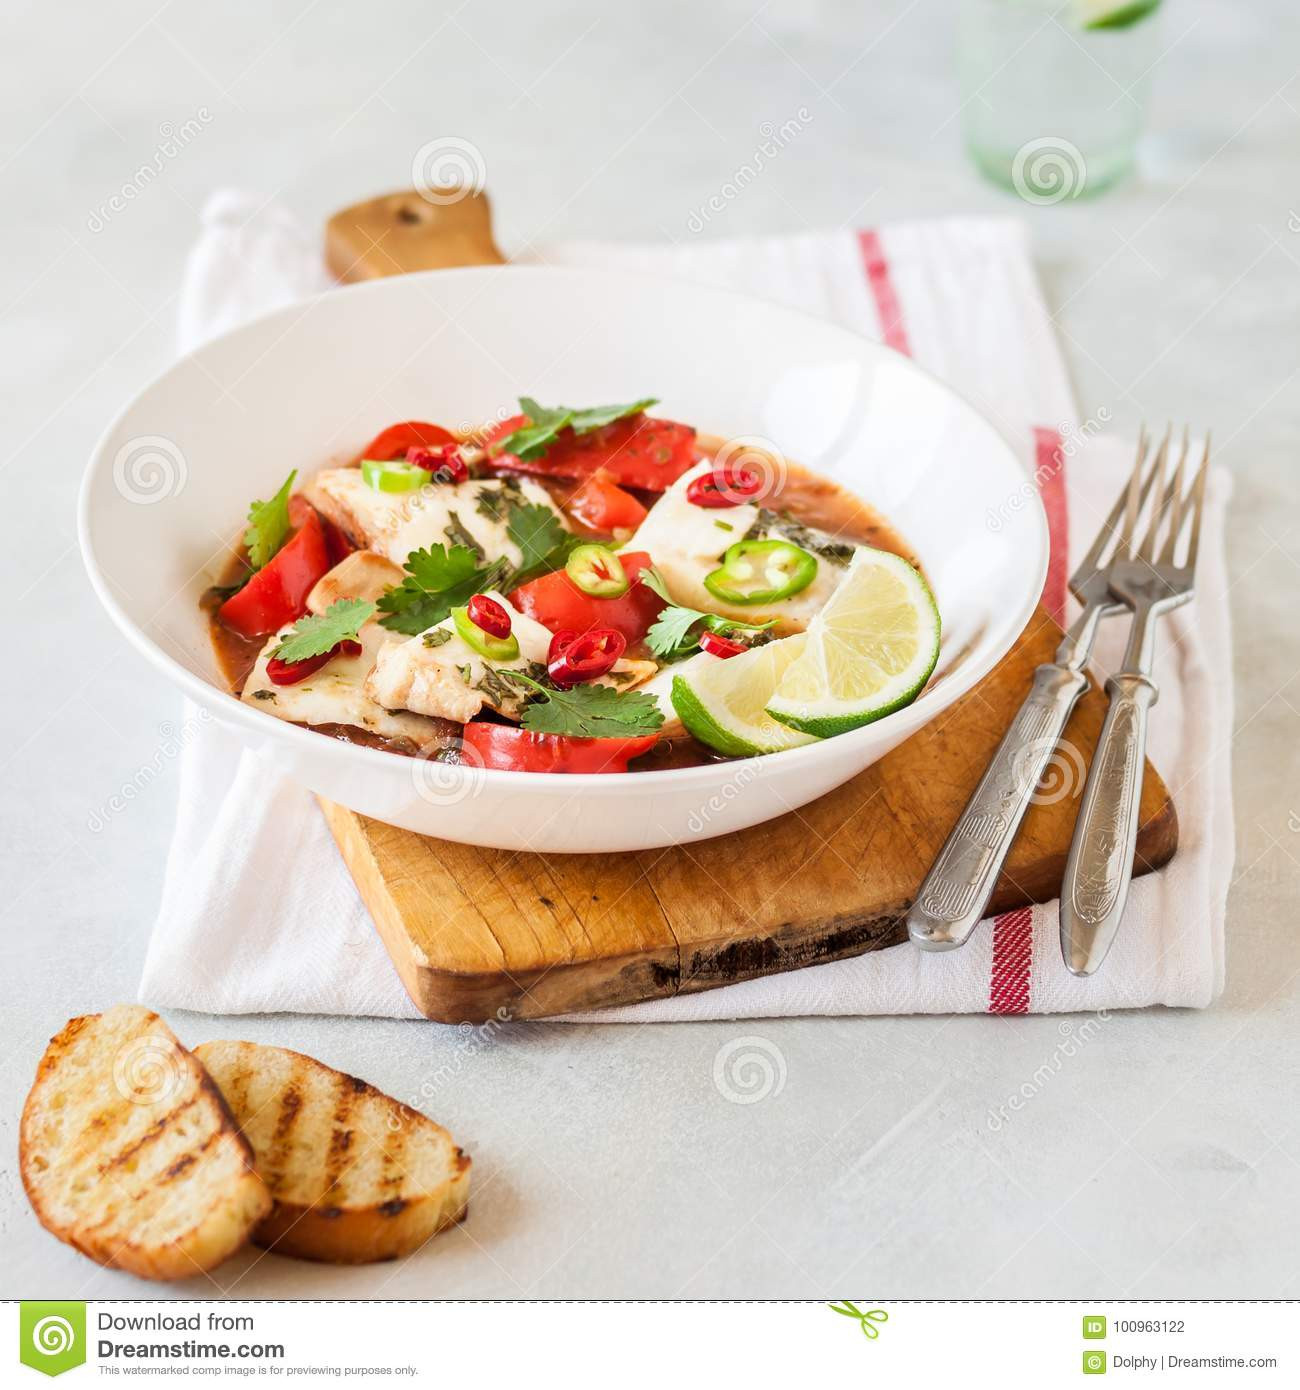 Fish Stew With Coconut Milk
 Tomato And Coconut Milk Fish Stew Stock Image of